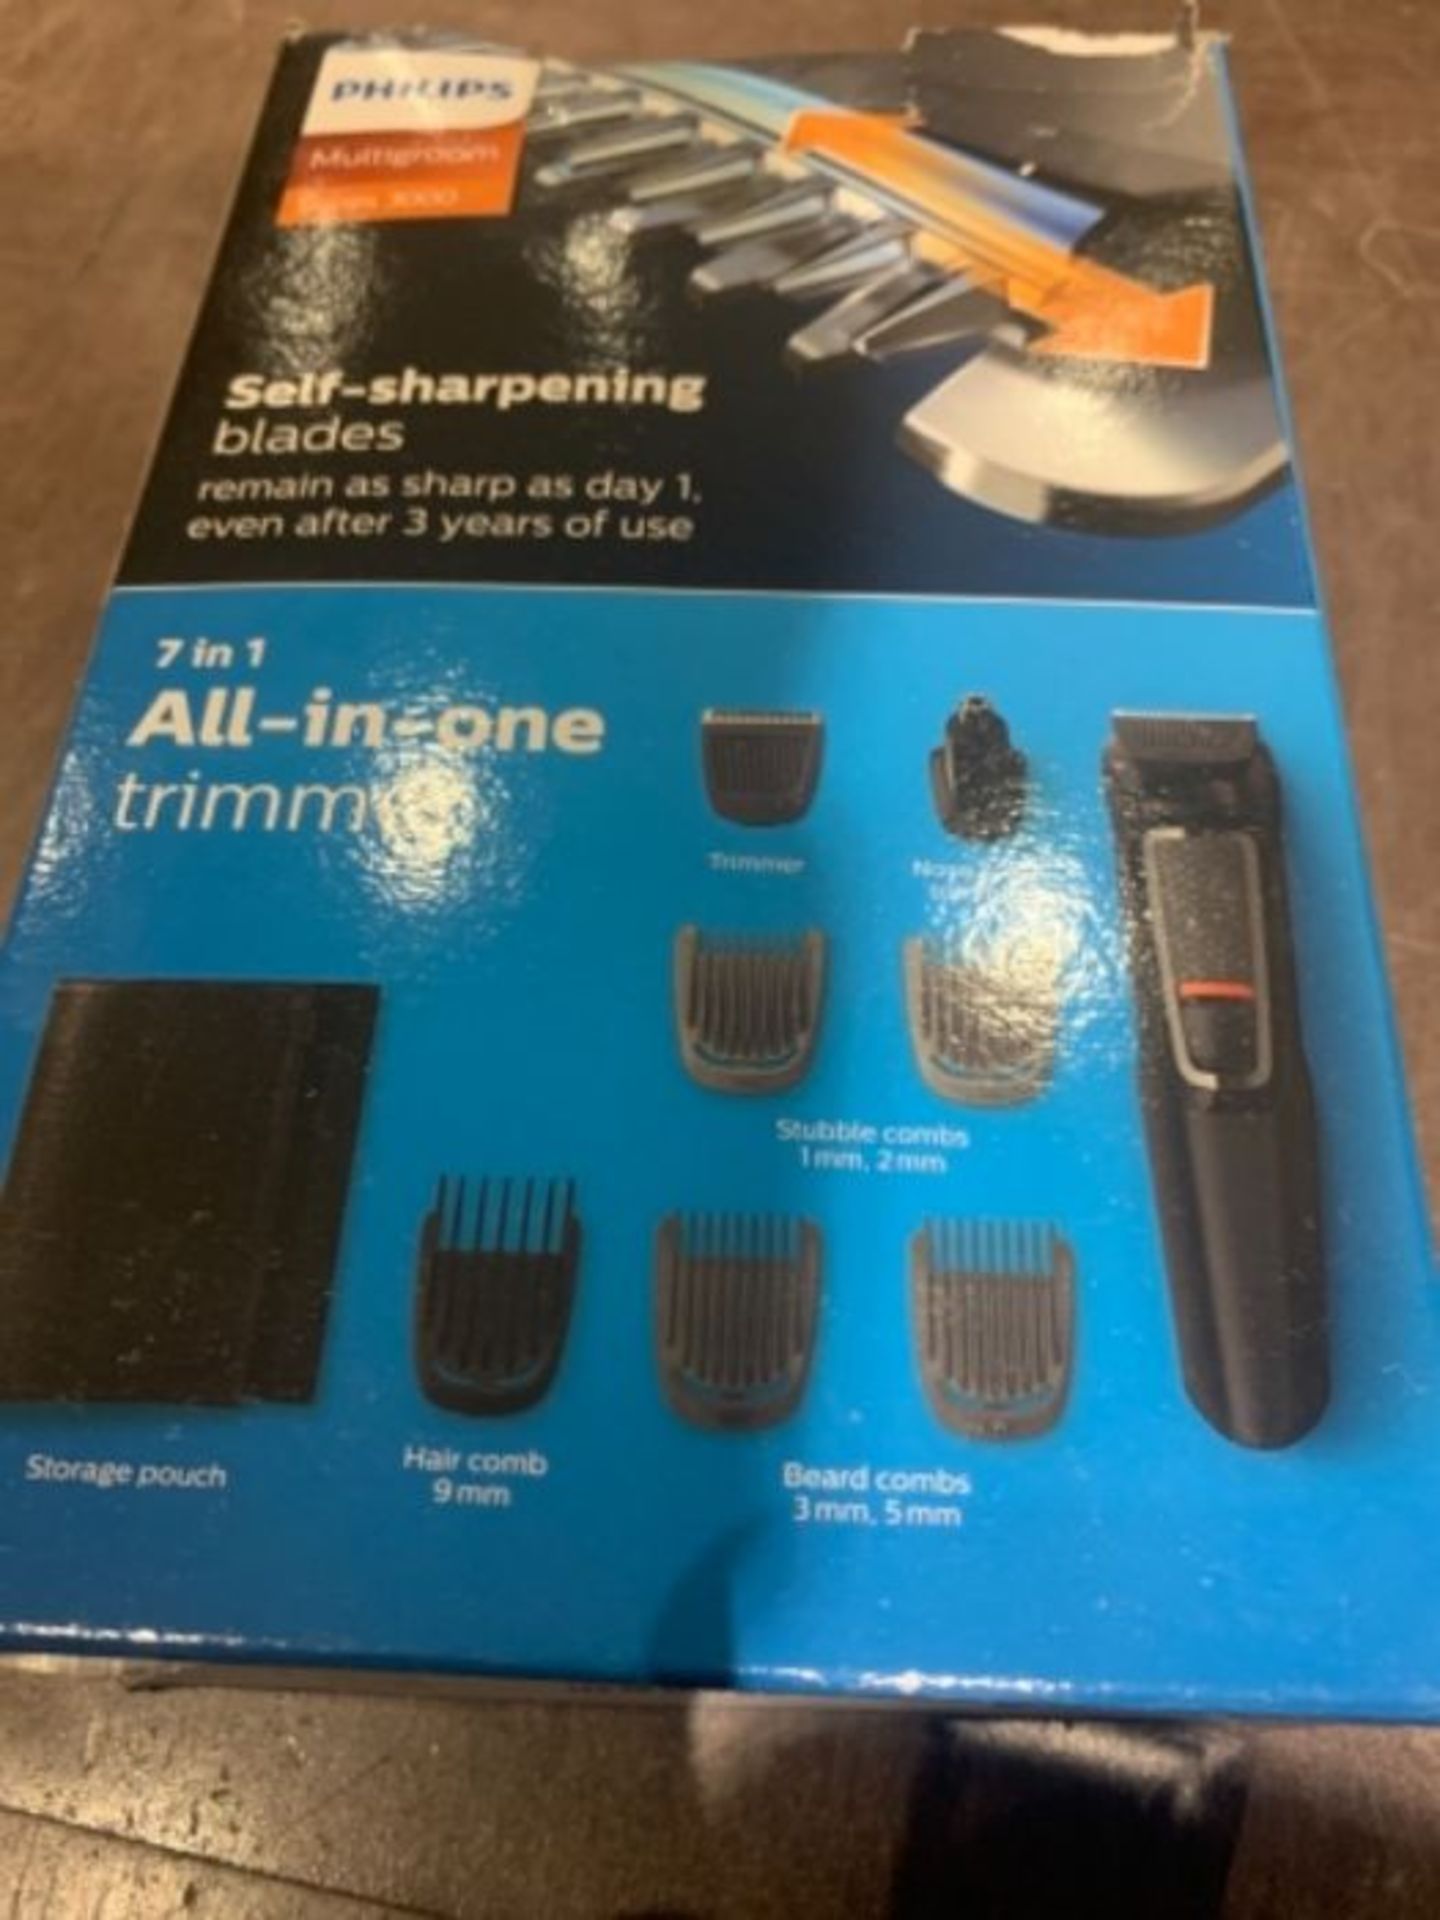 Philips 7-in-1 All-In-One Trimmer, Series 3000 Grooming Kit, Beard Trimmer and Hair Cl - Image 2 of 3